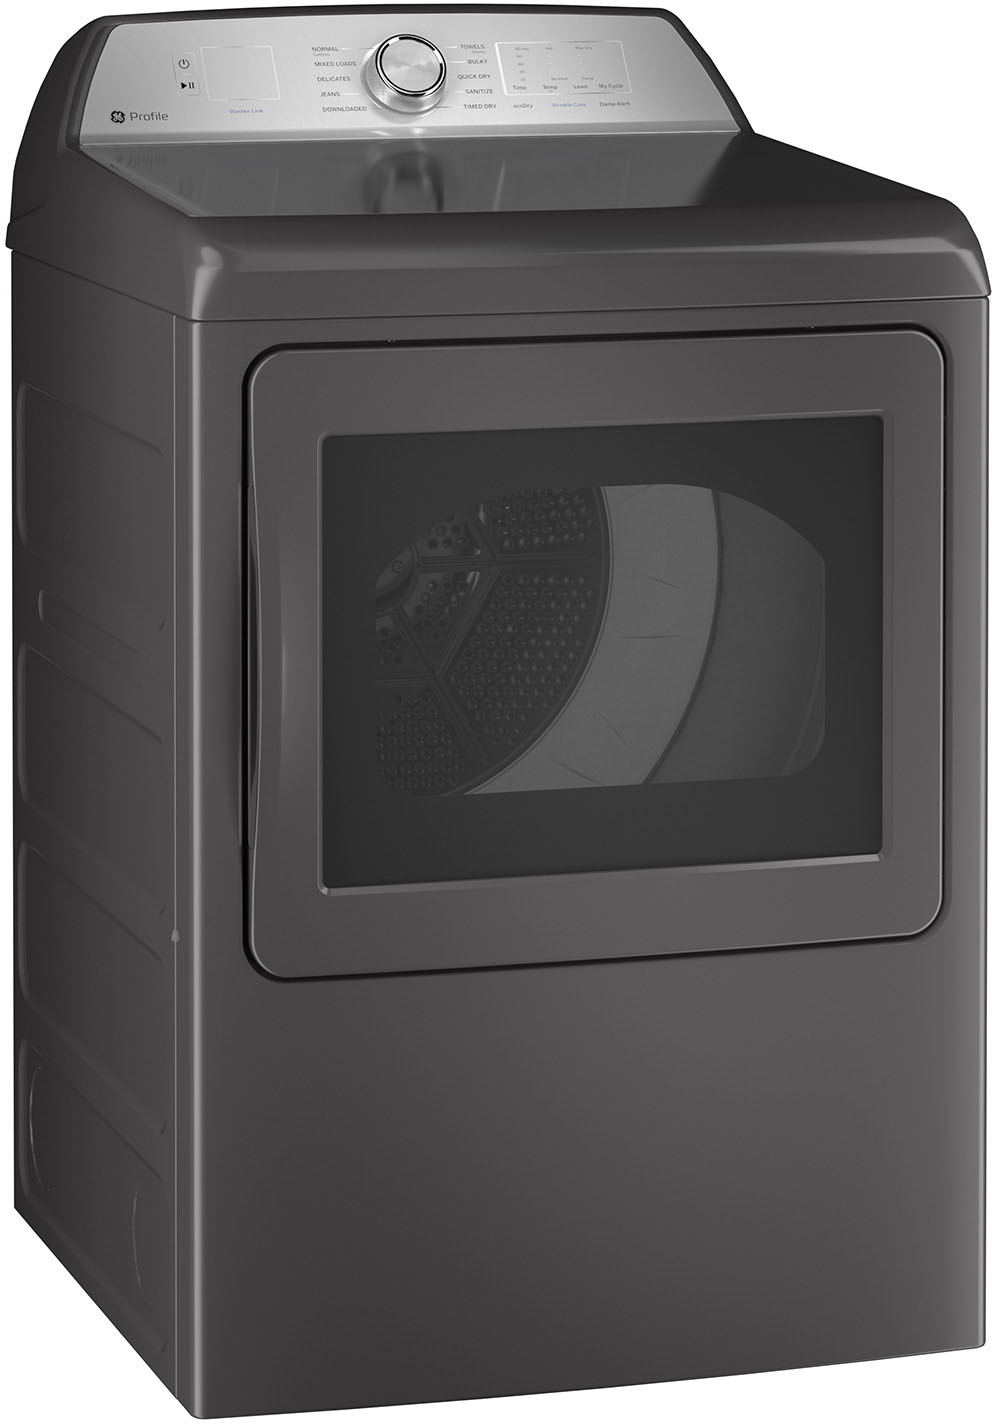 Angle View: GE Profile - 7.4 Cu. Ft. Smart Electric Dryer with Sanitize Cycle and Sensor Dry - Diamond Gray